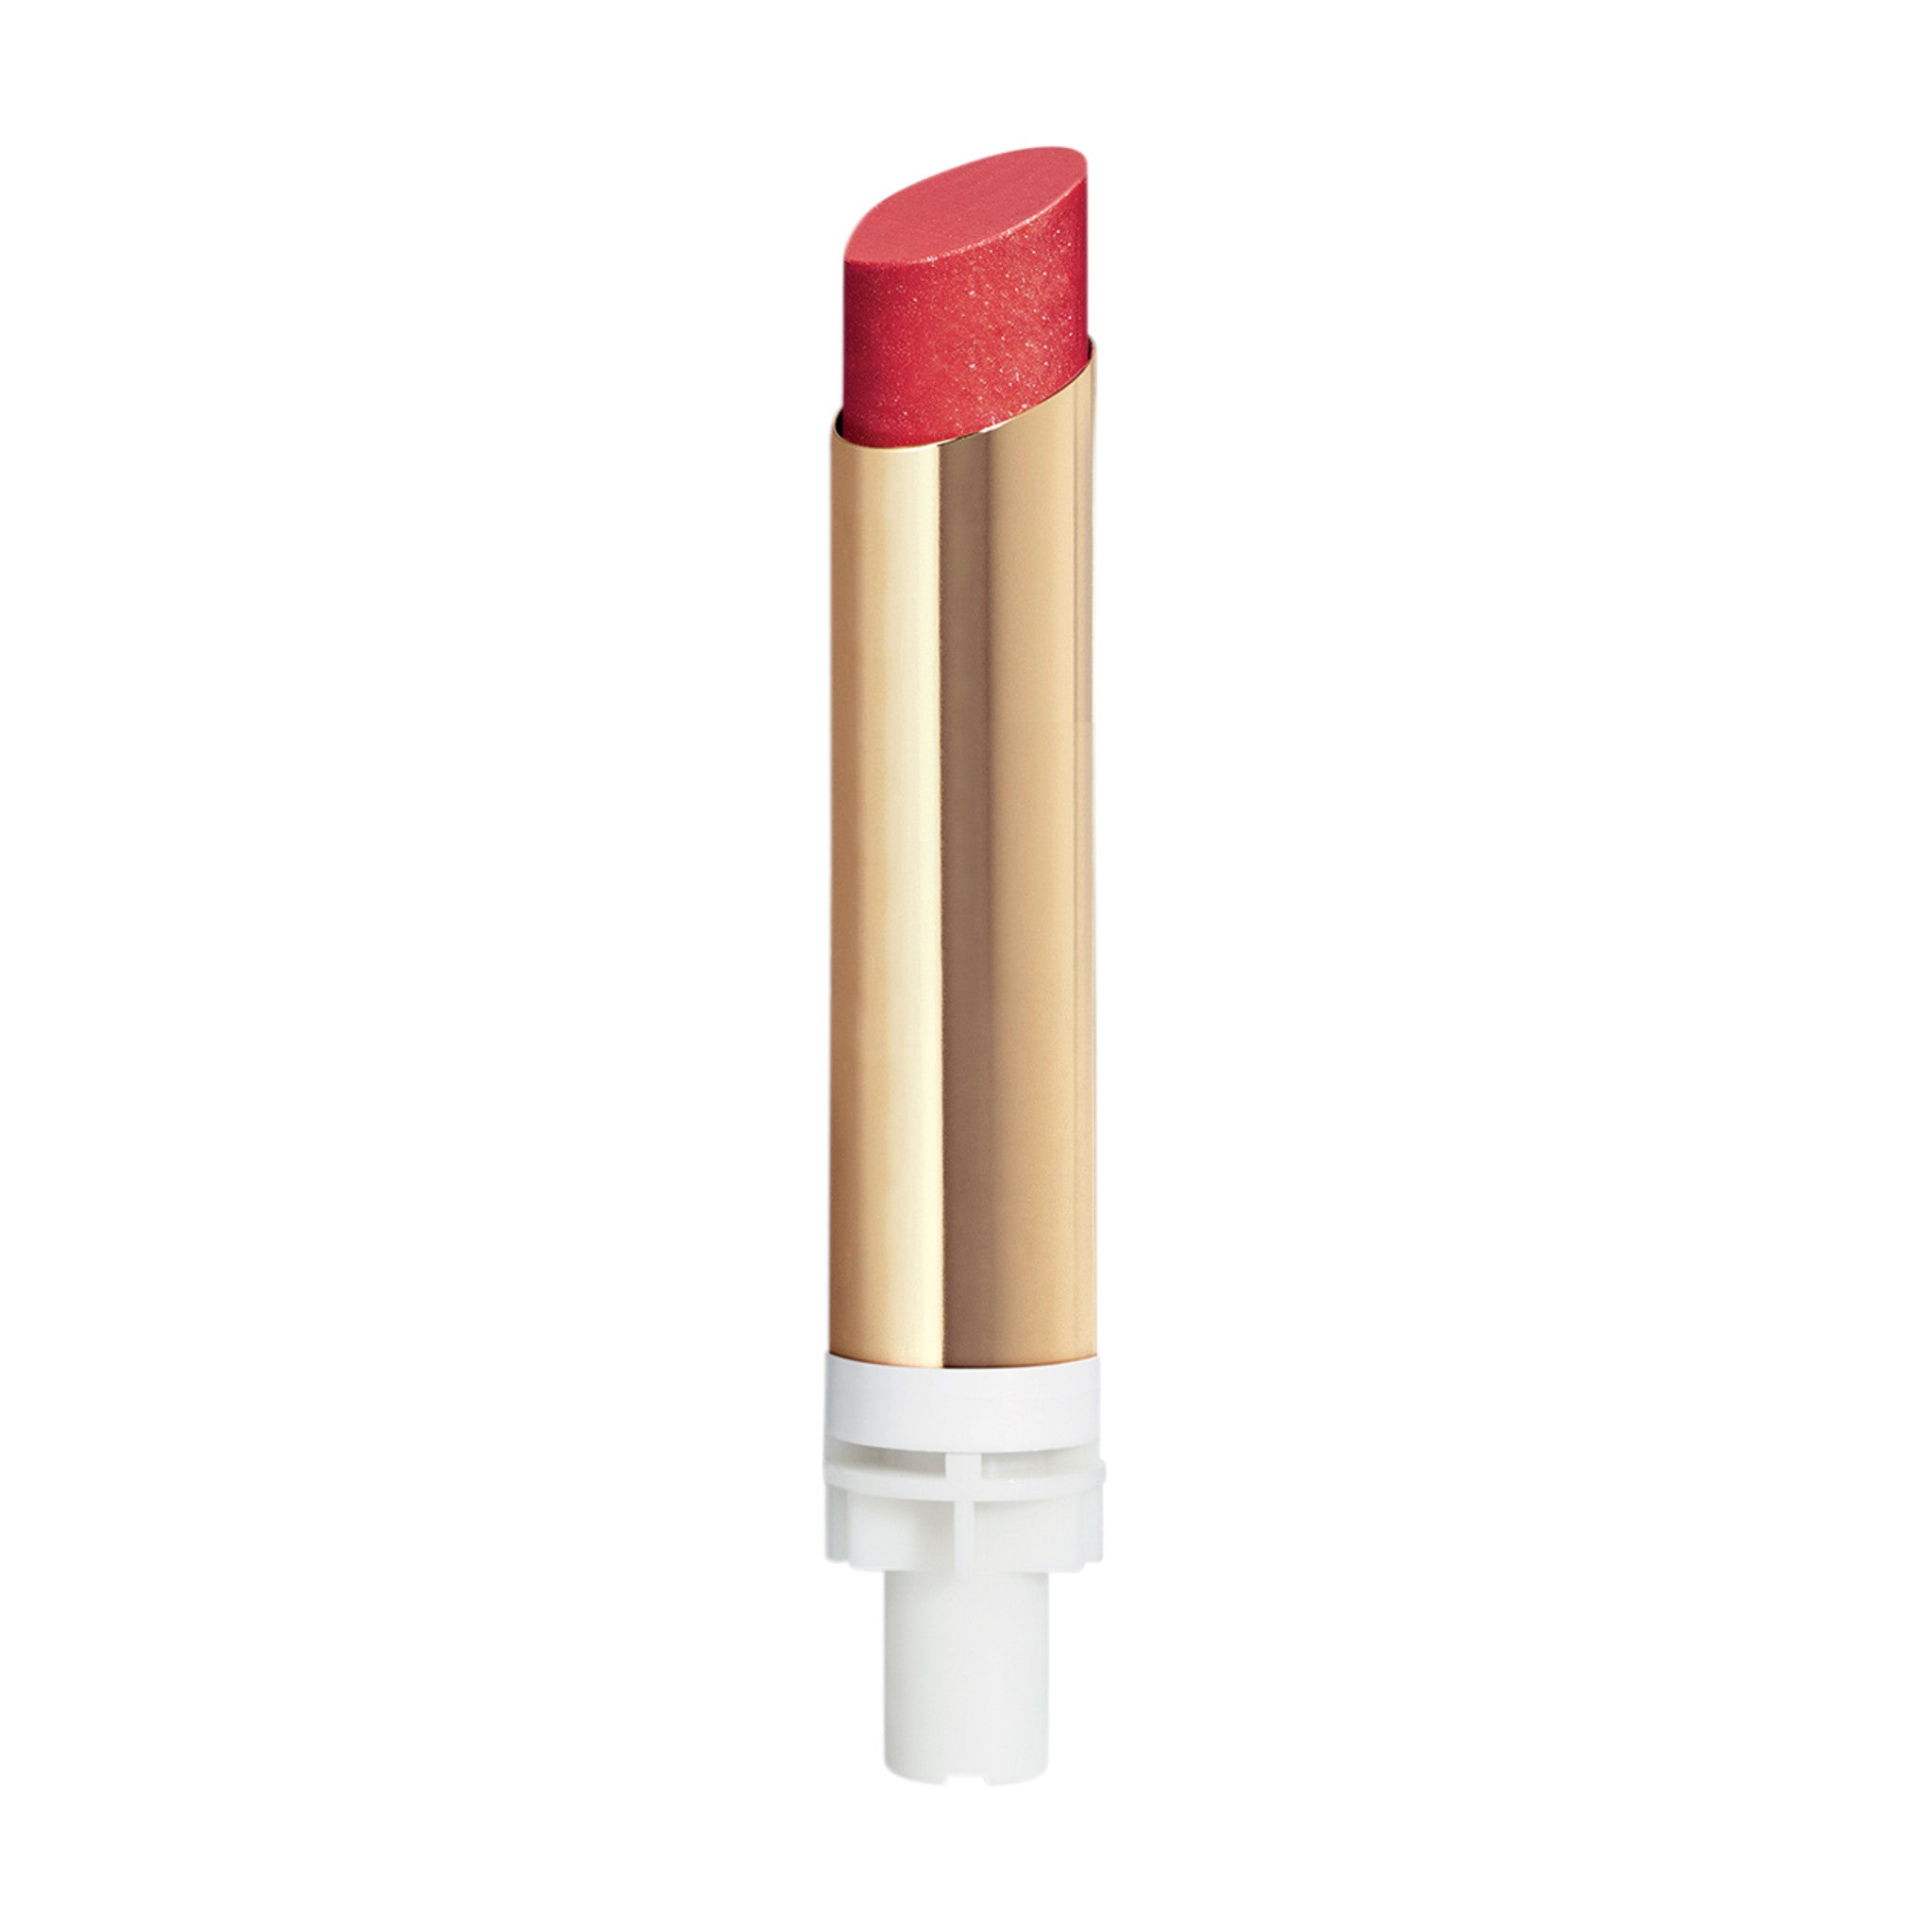 Sisley-Paris Phyto-Rouge Shine Refill Color/Shade variant: 30 Sheer Coral main image. This product is in the color coral